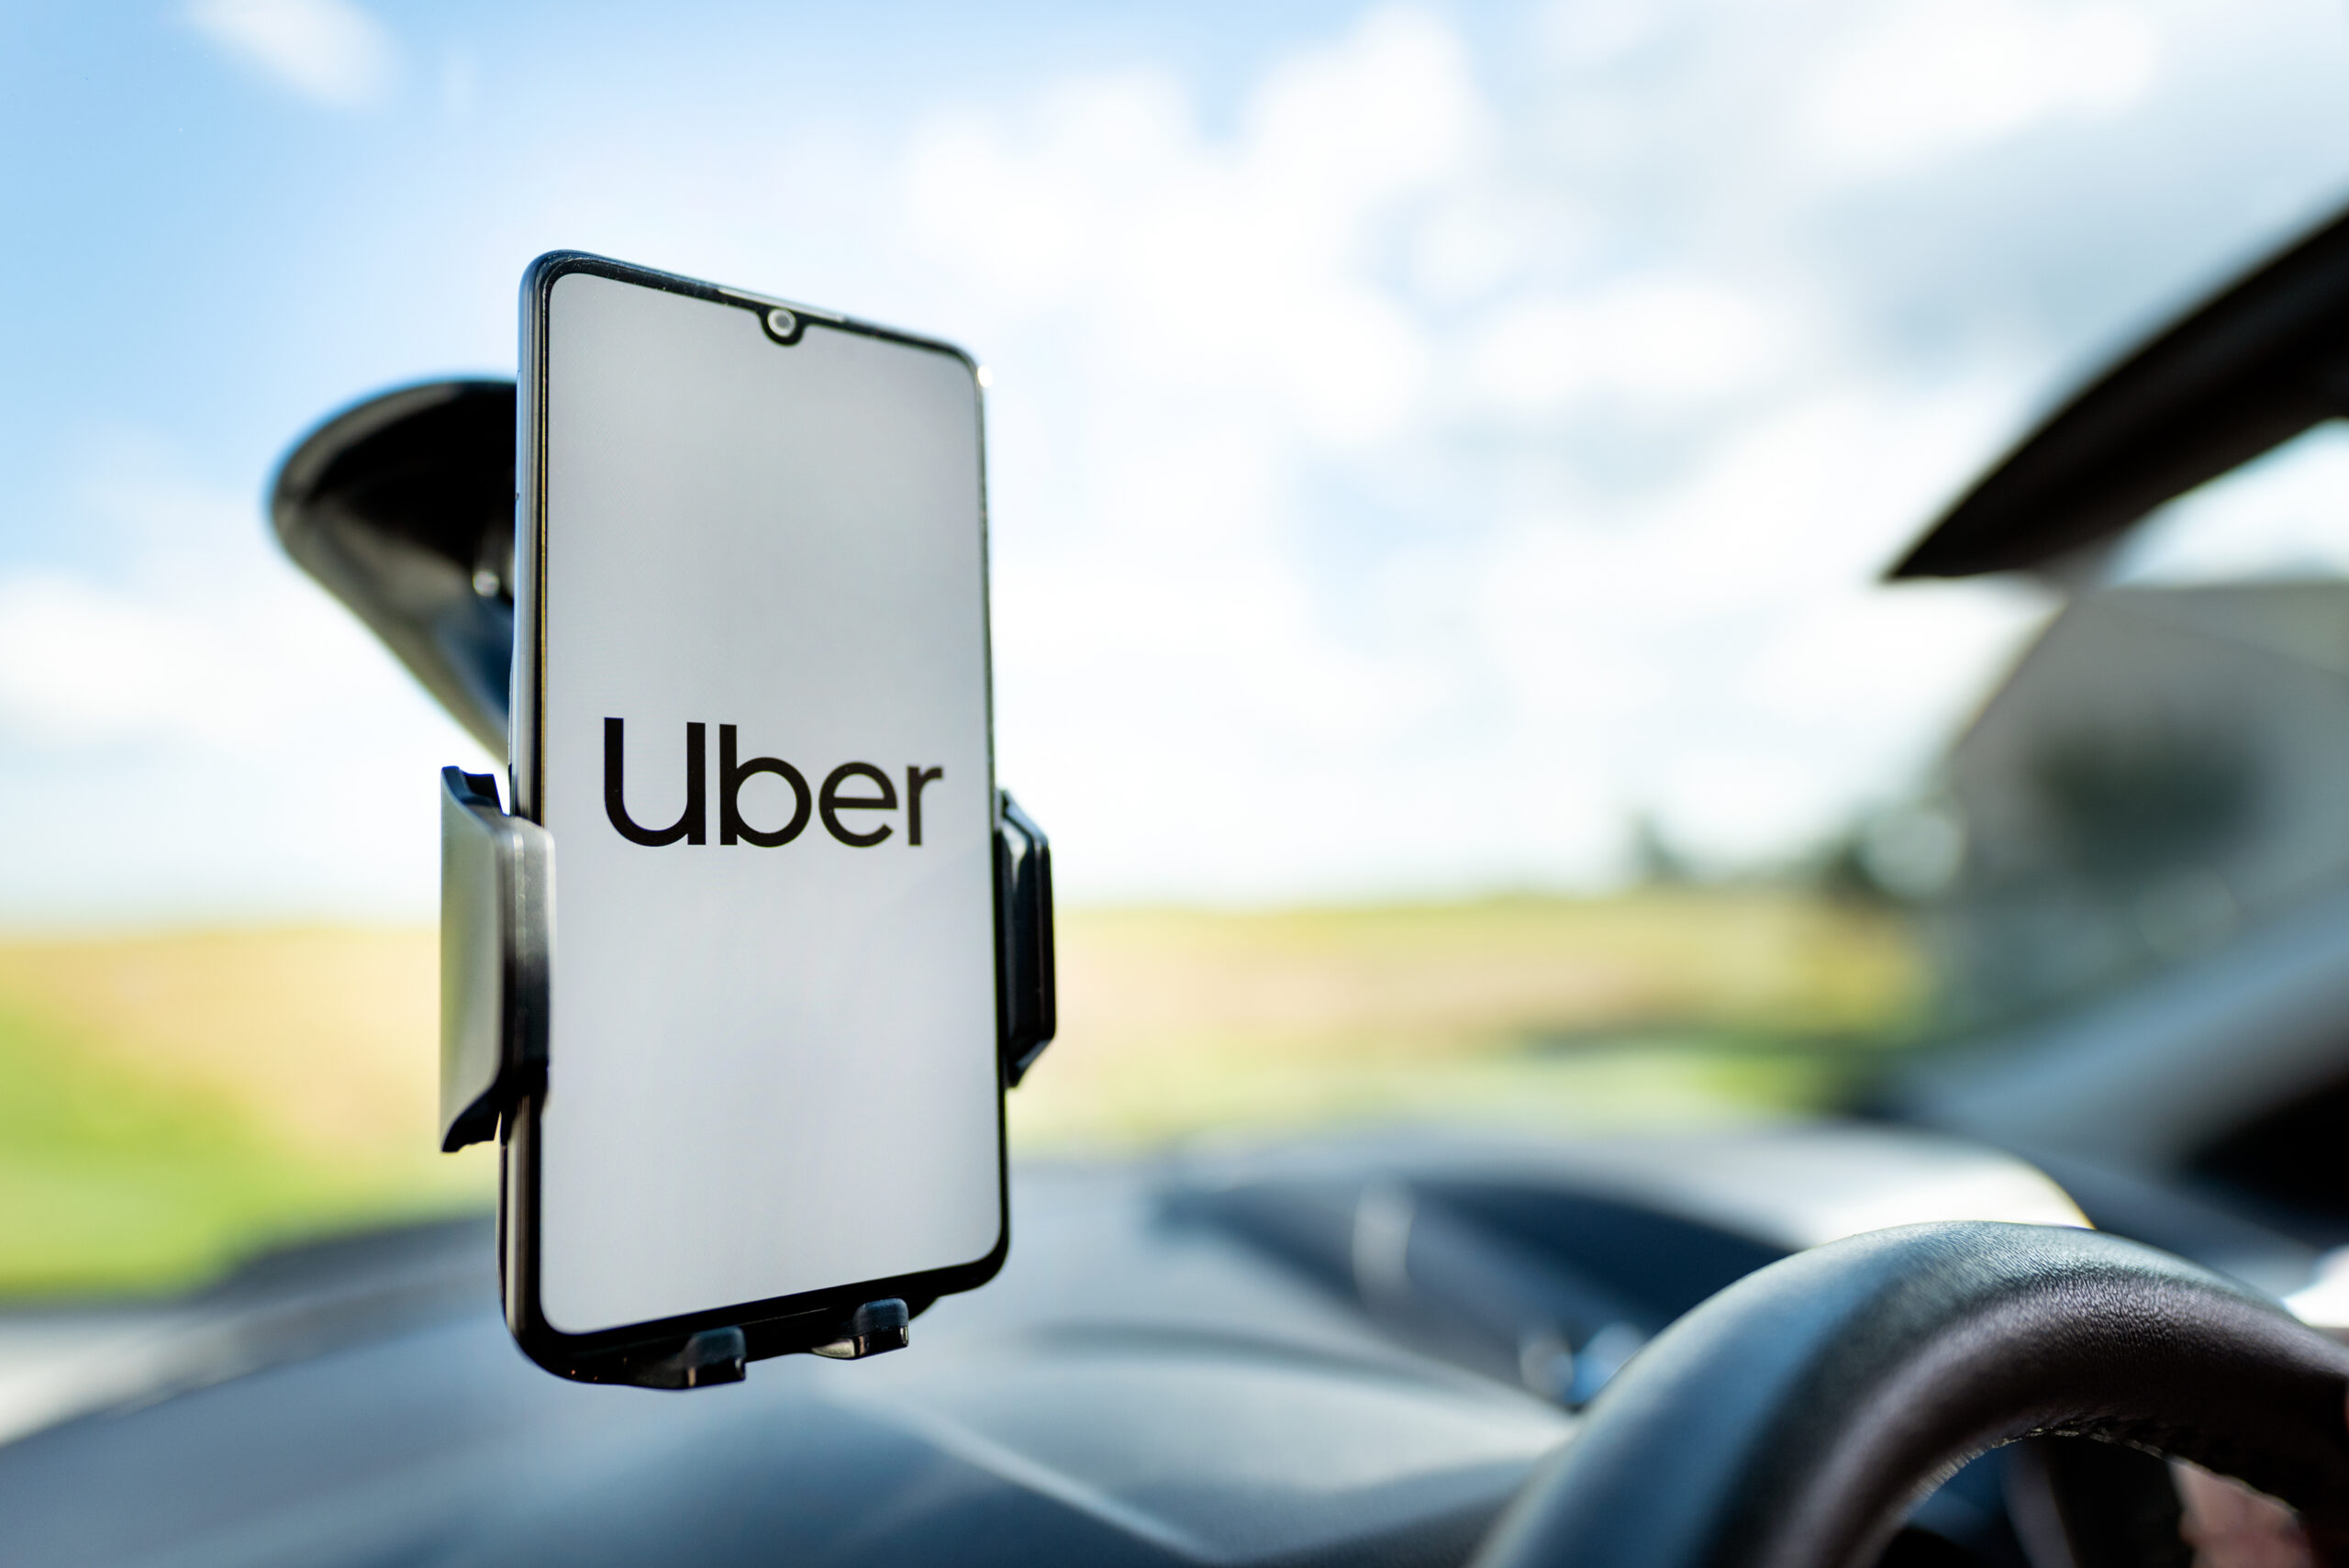 Uber-App-Open-on-cell-phone-on-a-car-windscreen-holder